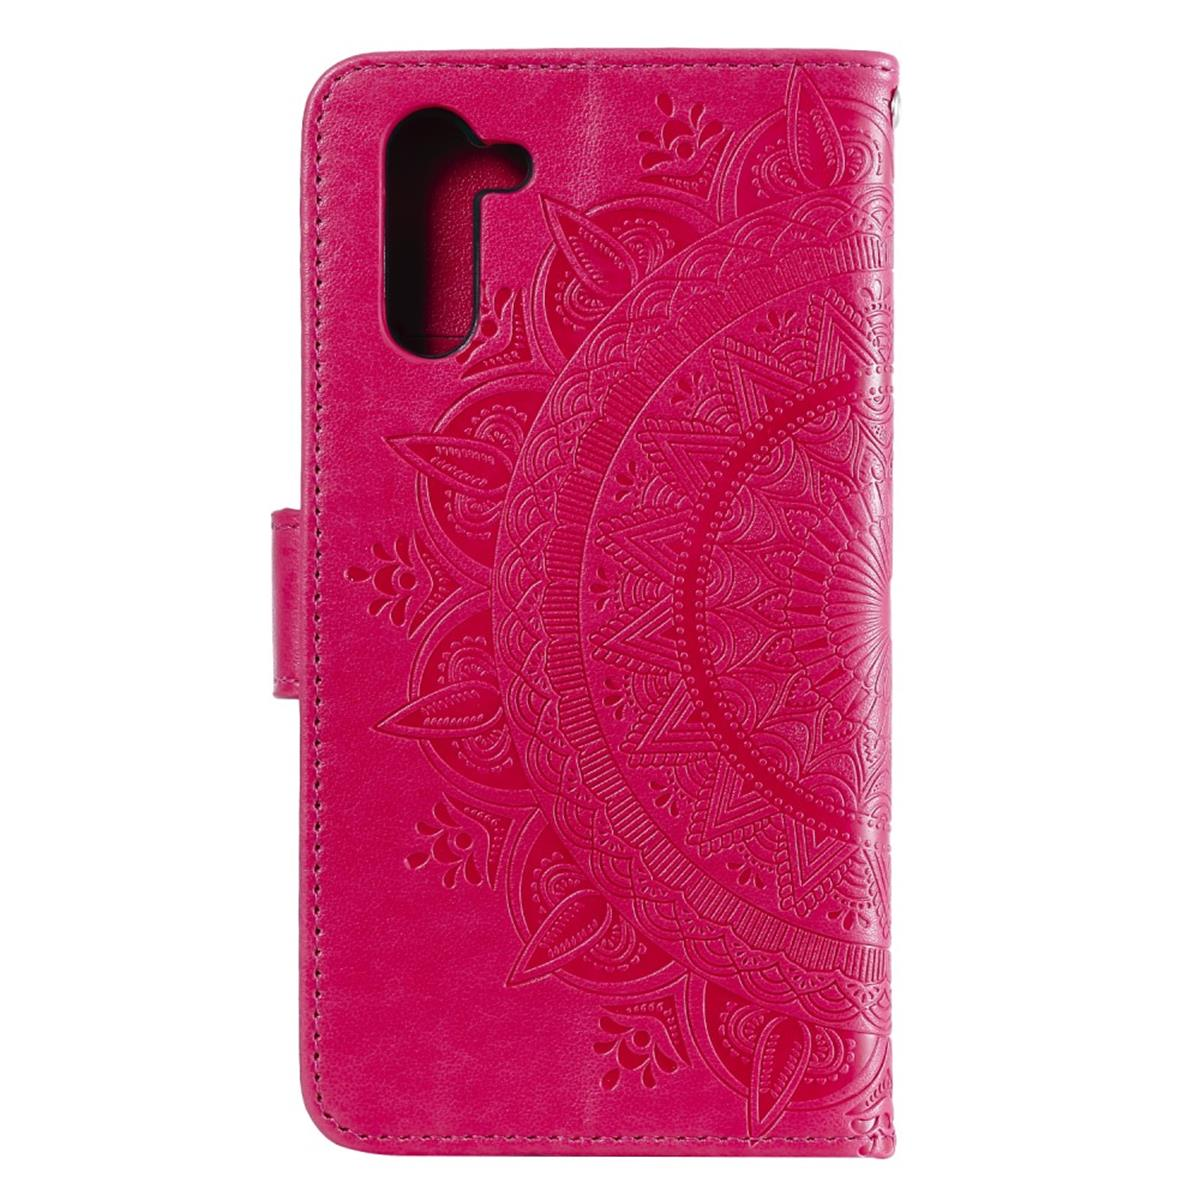 mit Muster, Note10, Klapphülle Mandala Pink Samsung, COVERKINGZ Bookcover, Galaxy